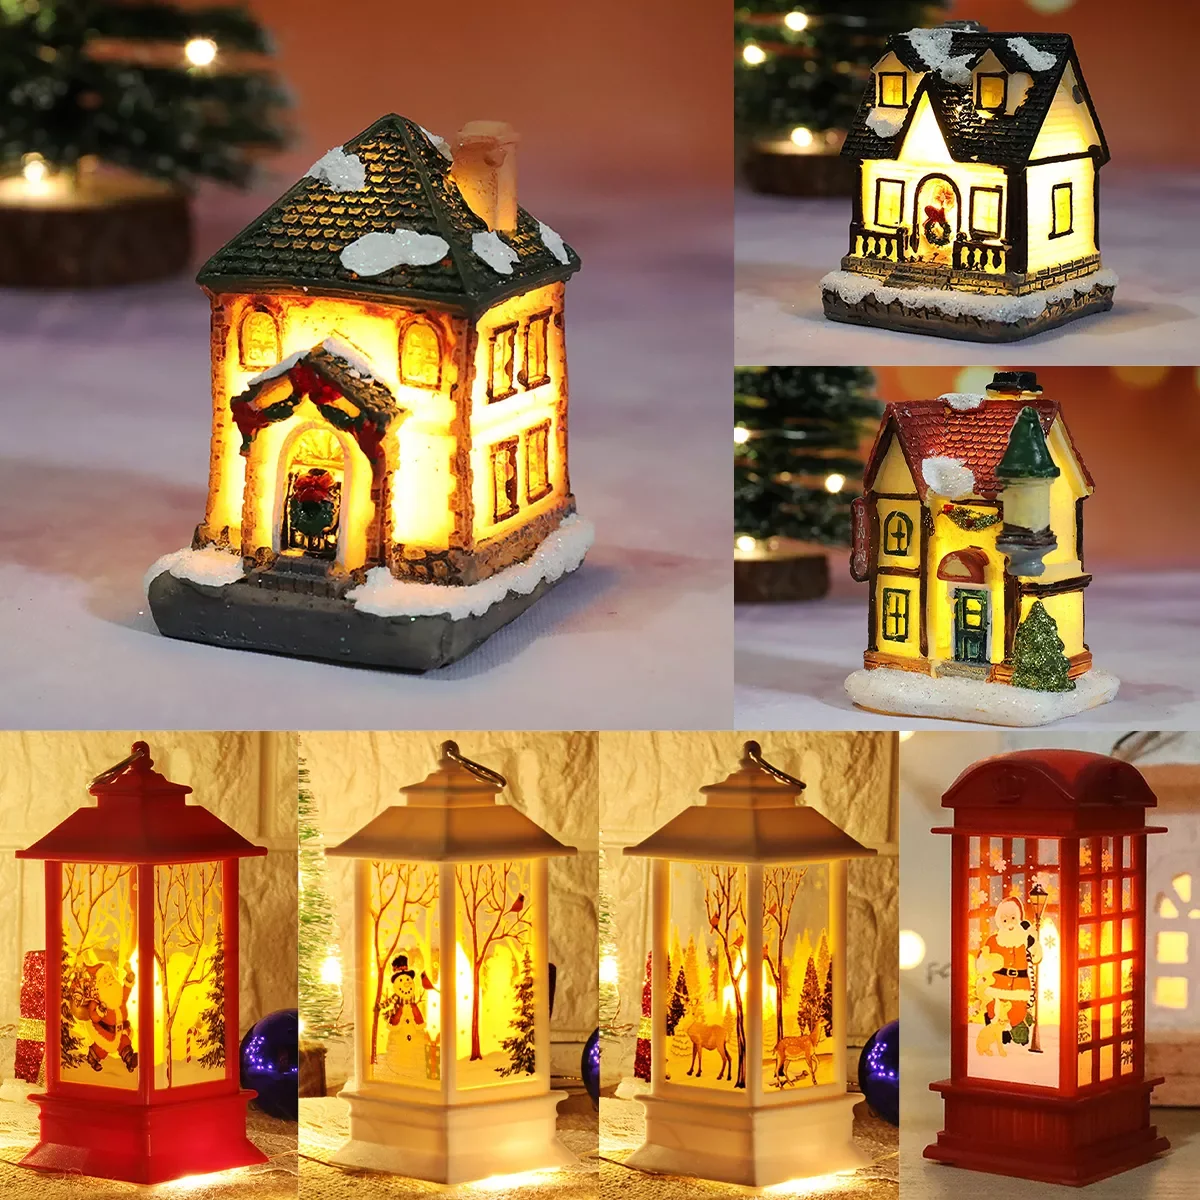 

Light House Merry Christmas Decorations For Home Xmas Gifts Cristmas Ornaments New Year 2022 Natale Navidad Noel Decor